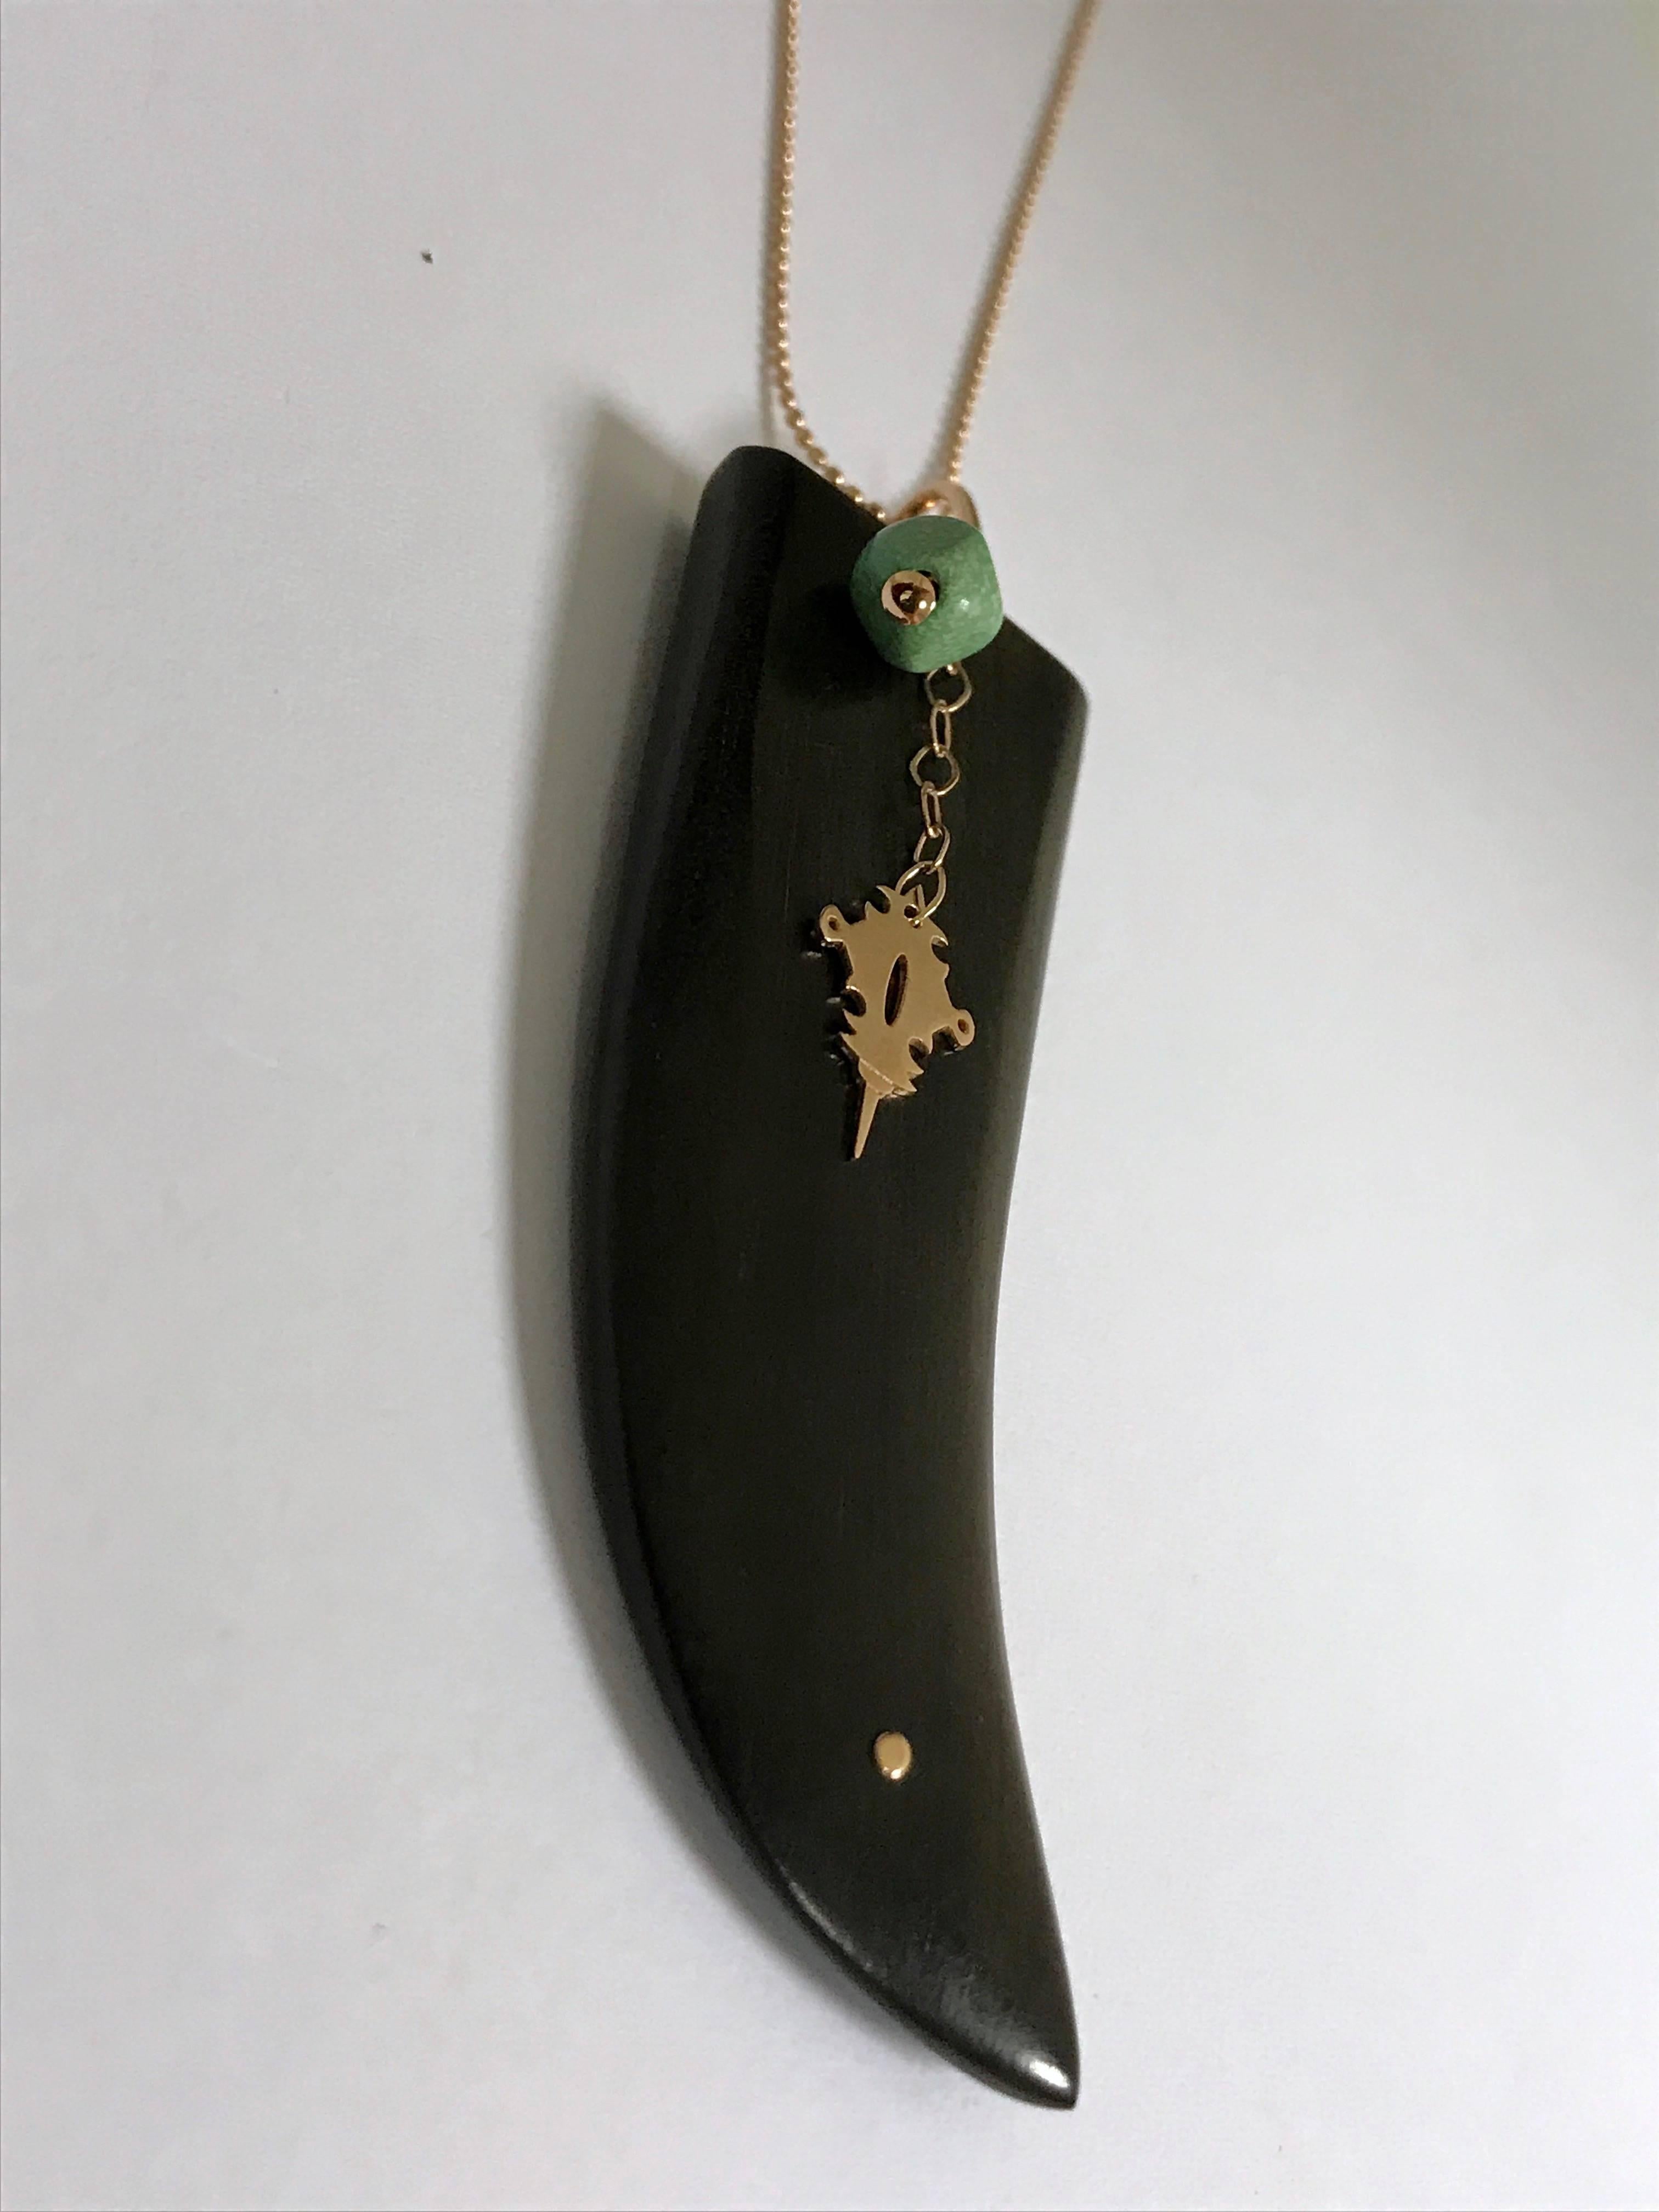 Beautiful Yellow Gold Turquoise and Wood Pendant Necklace.
Yellow Gold 18 Carat
Turquoise 
Wood
